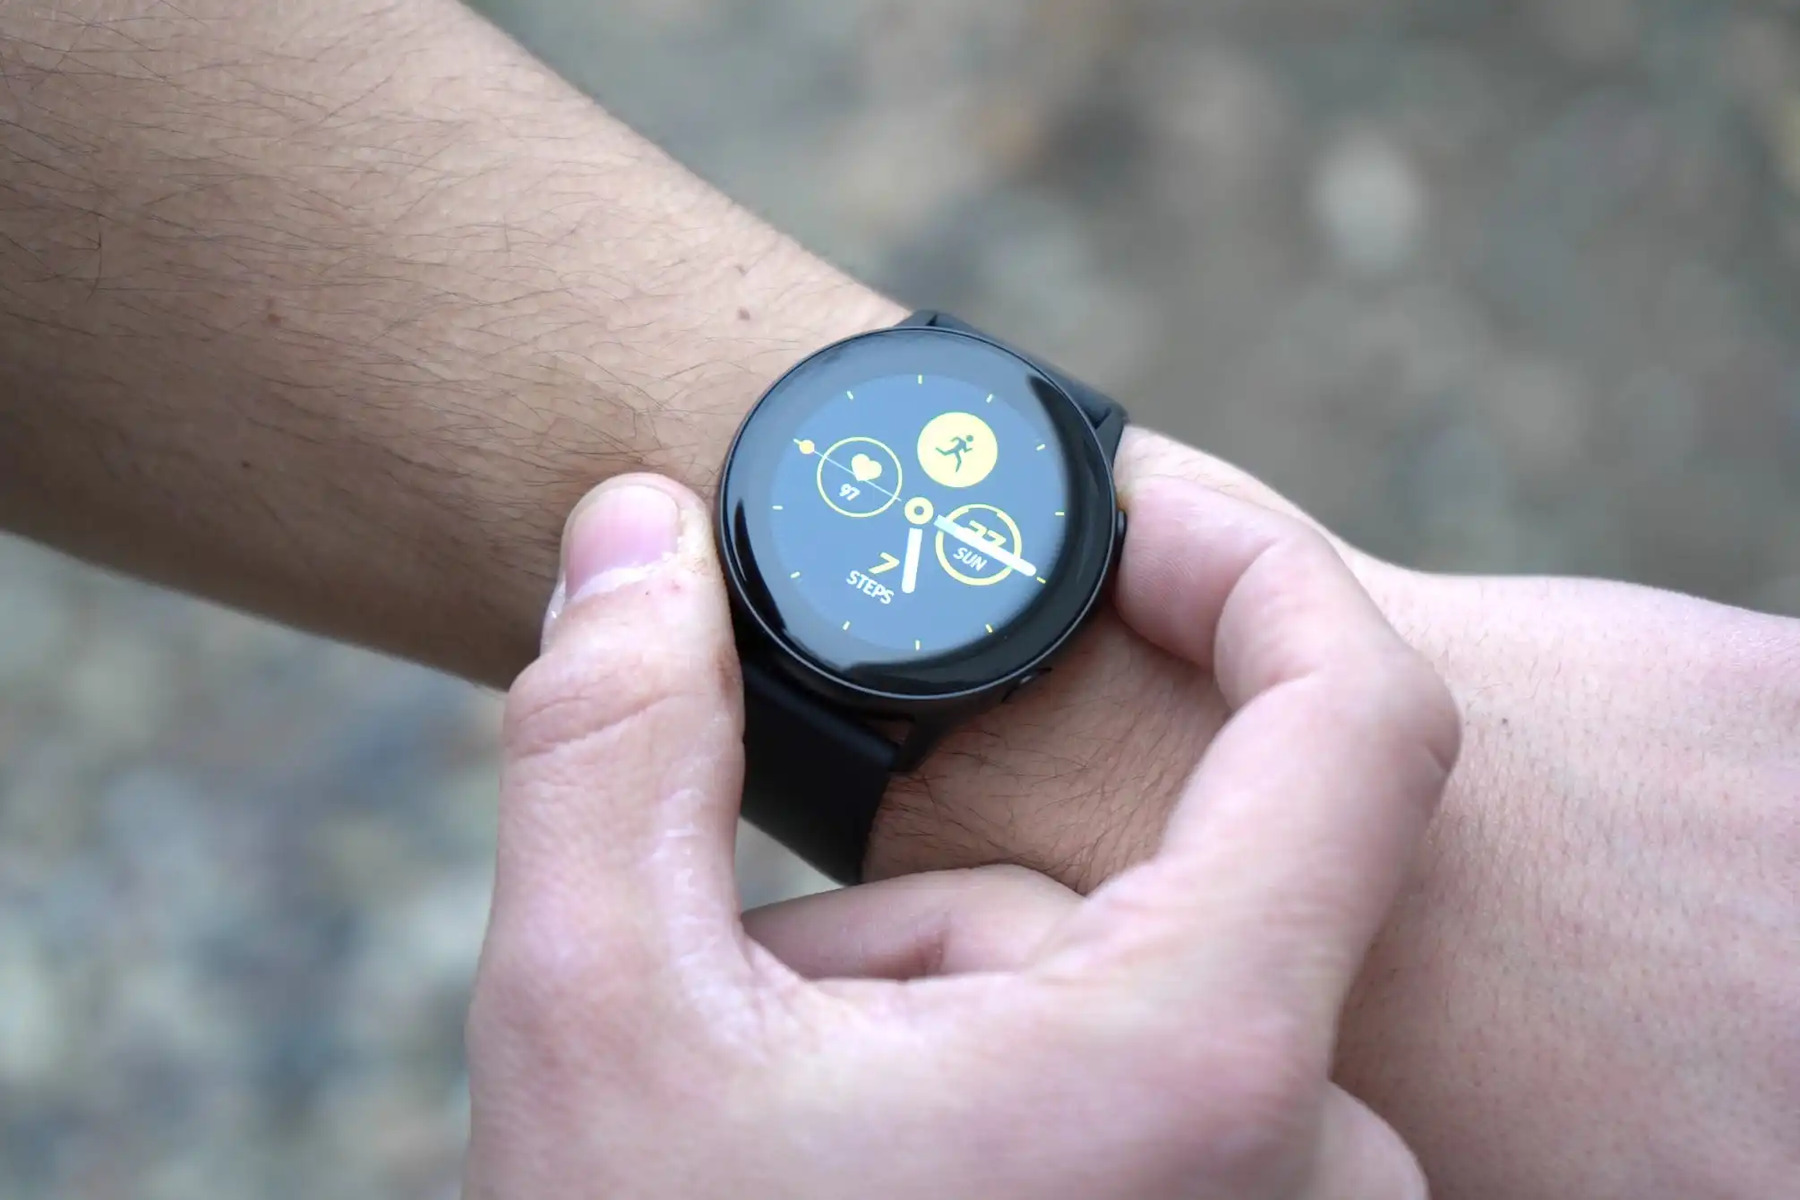 Compact Smartwatches: Finding The Smallest In The Market